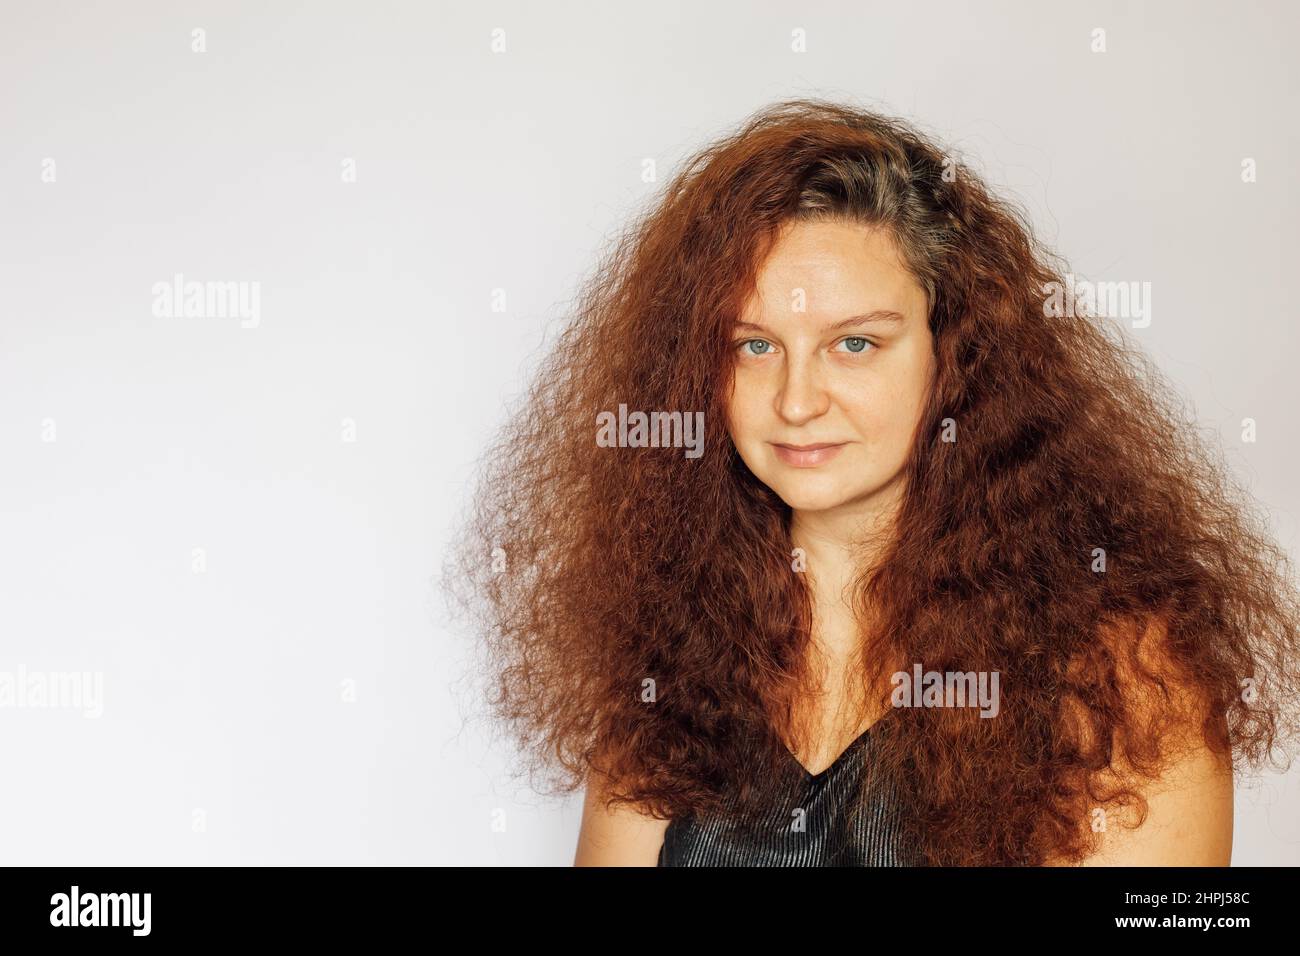 Slightly smiling Caucasian young woman with long curly lush red colored hair, clean face skin and eyes looking at camera on white background. Self Stock Photo